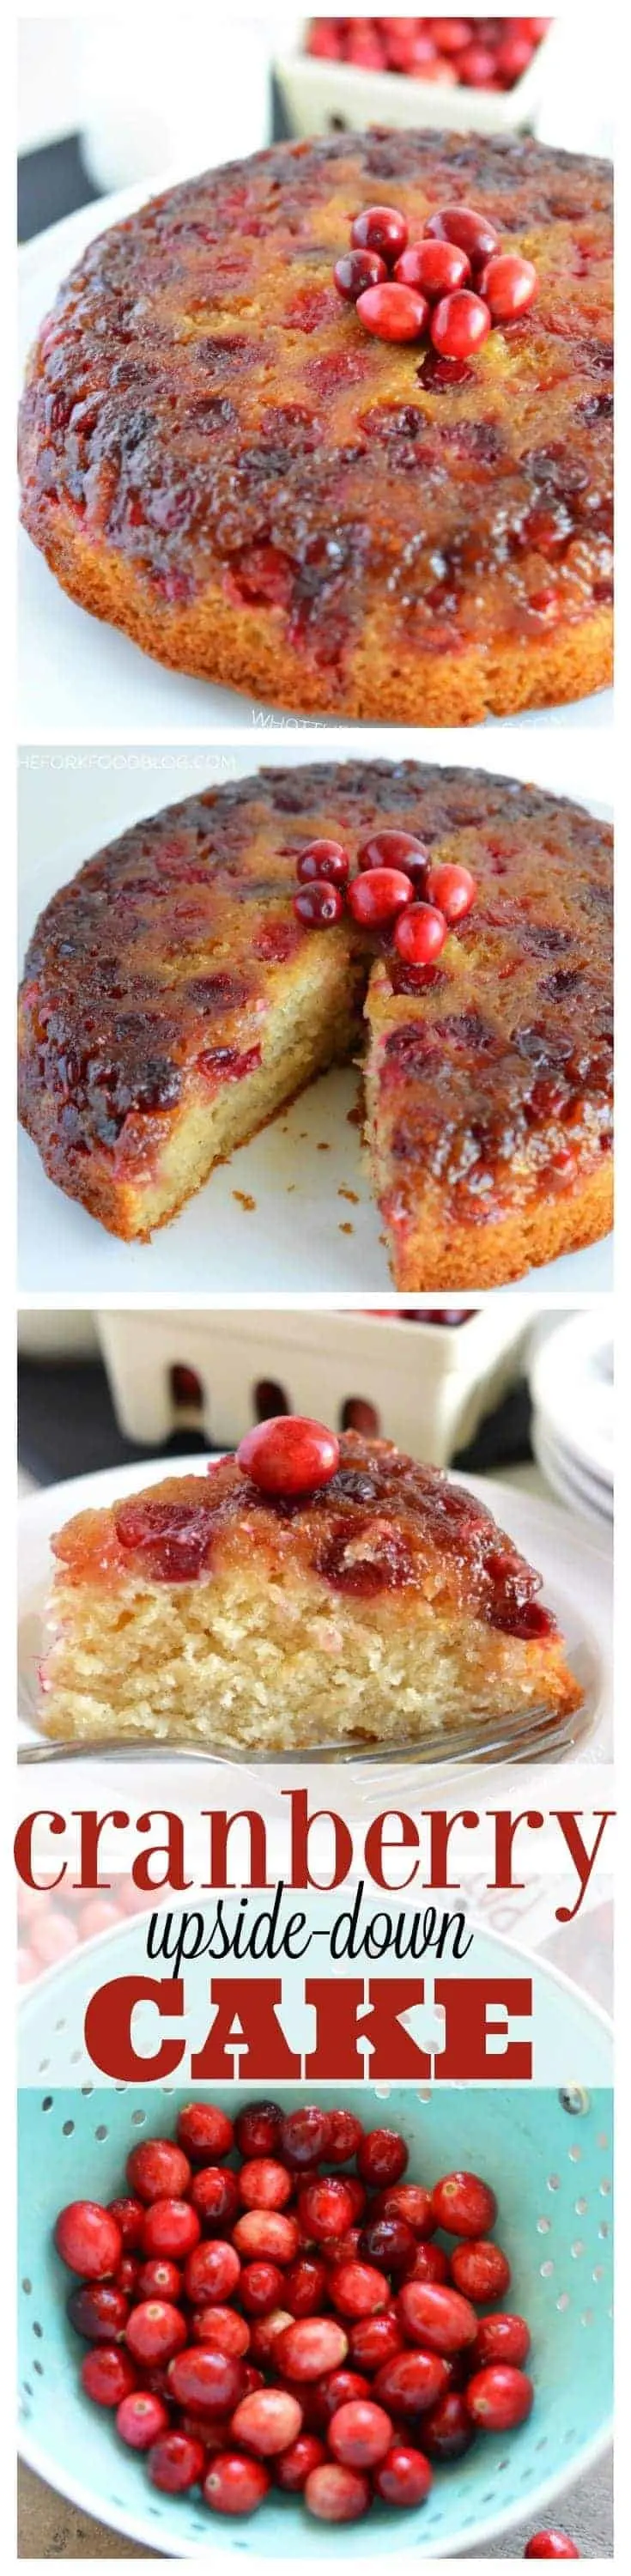 Cranberry Upside-Down Cake (gluten free and dairy free) from What The Fork Food Blog | whattheforkfoodblog.com